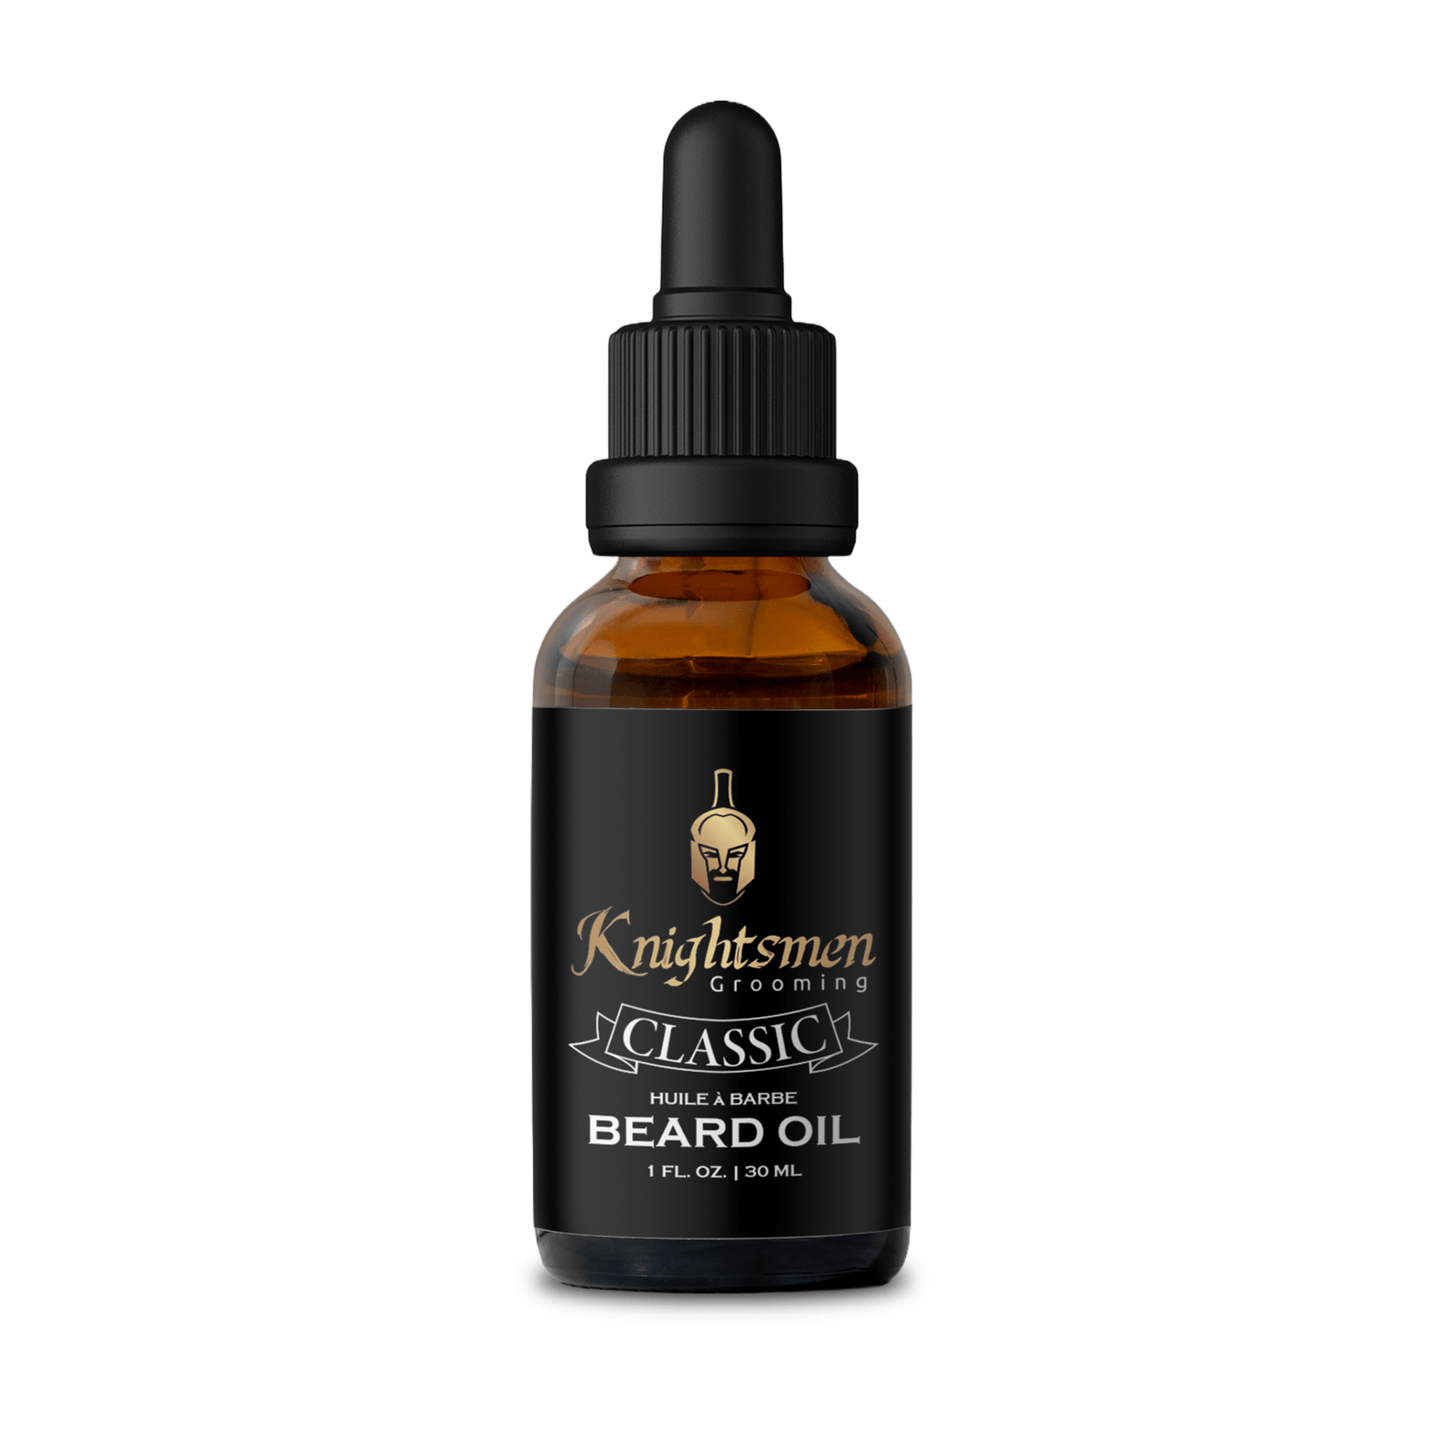 Classic Unscented Original Beard Oil Kit for Beard Growth and Beard Conditioning by Knightsmen Grooming for all beard growth, beard care, beard conditioning, beard softener, beard serum, beard growth formula, beard oil recipe, beard oil, organic beard oil, scented beard oil, best beard oil, beard oil canada, beard oil toronto, beard oil for men, beard oil for men, beard oil